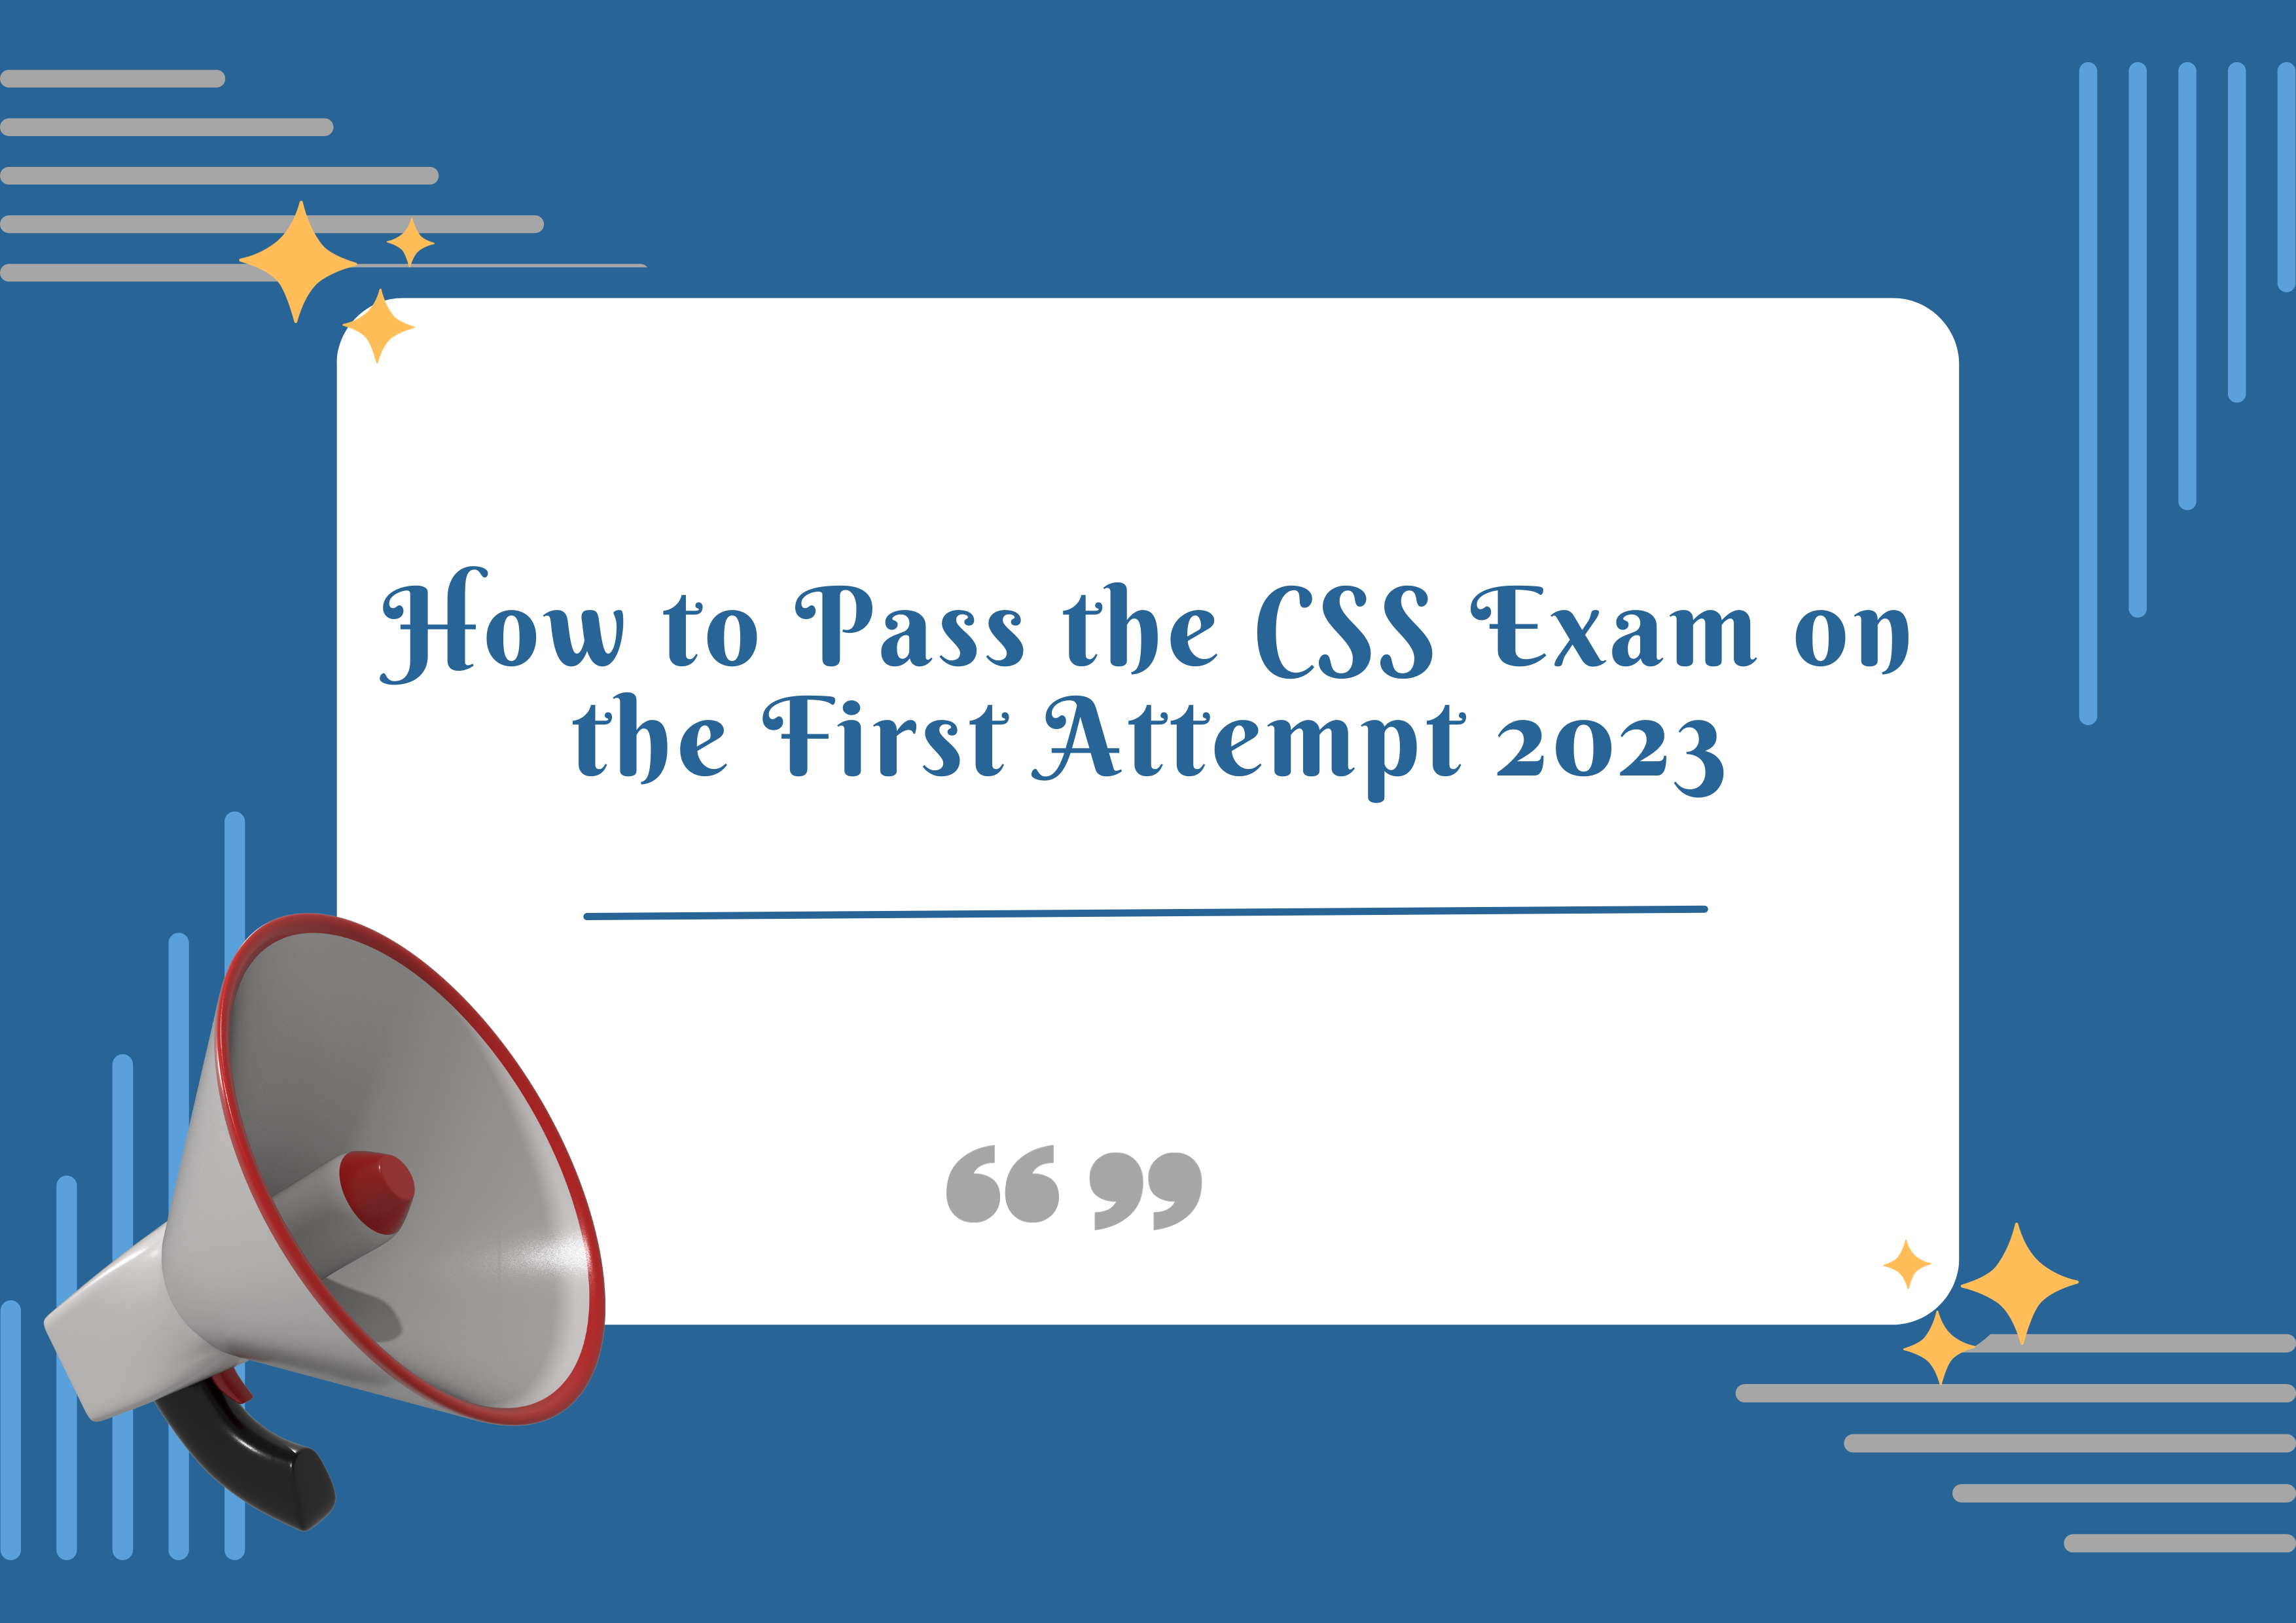 How to Pass the CSS Exam on the First Attempt 2023